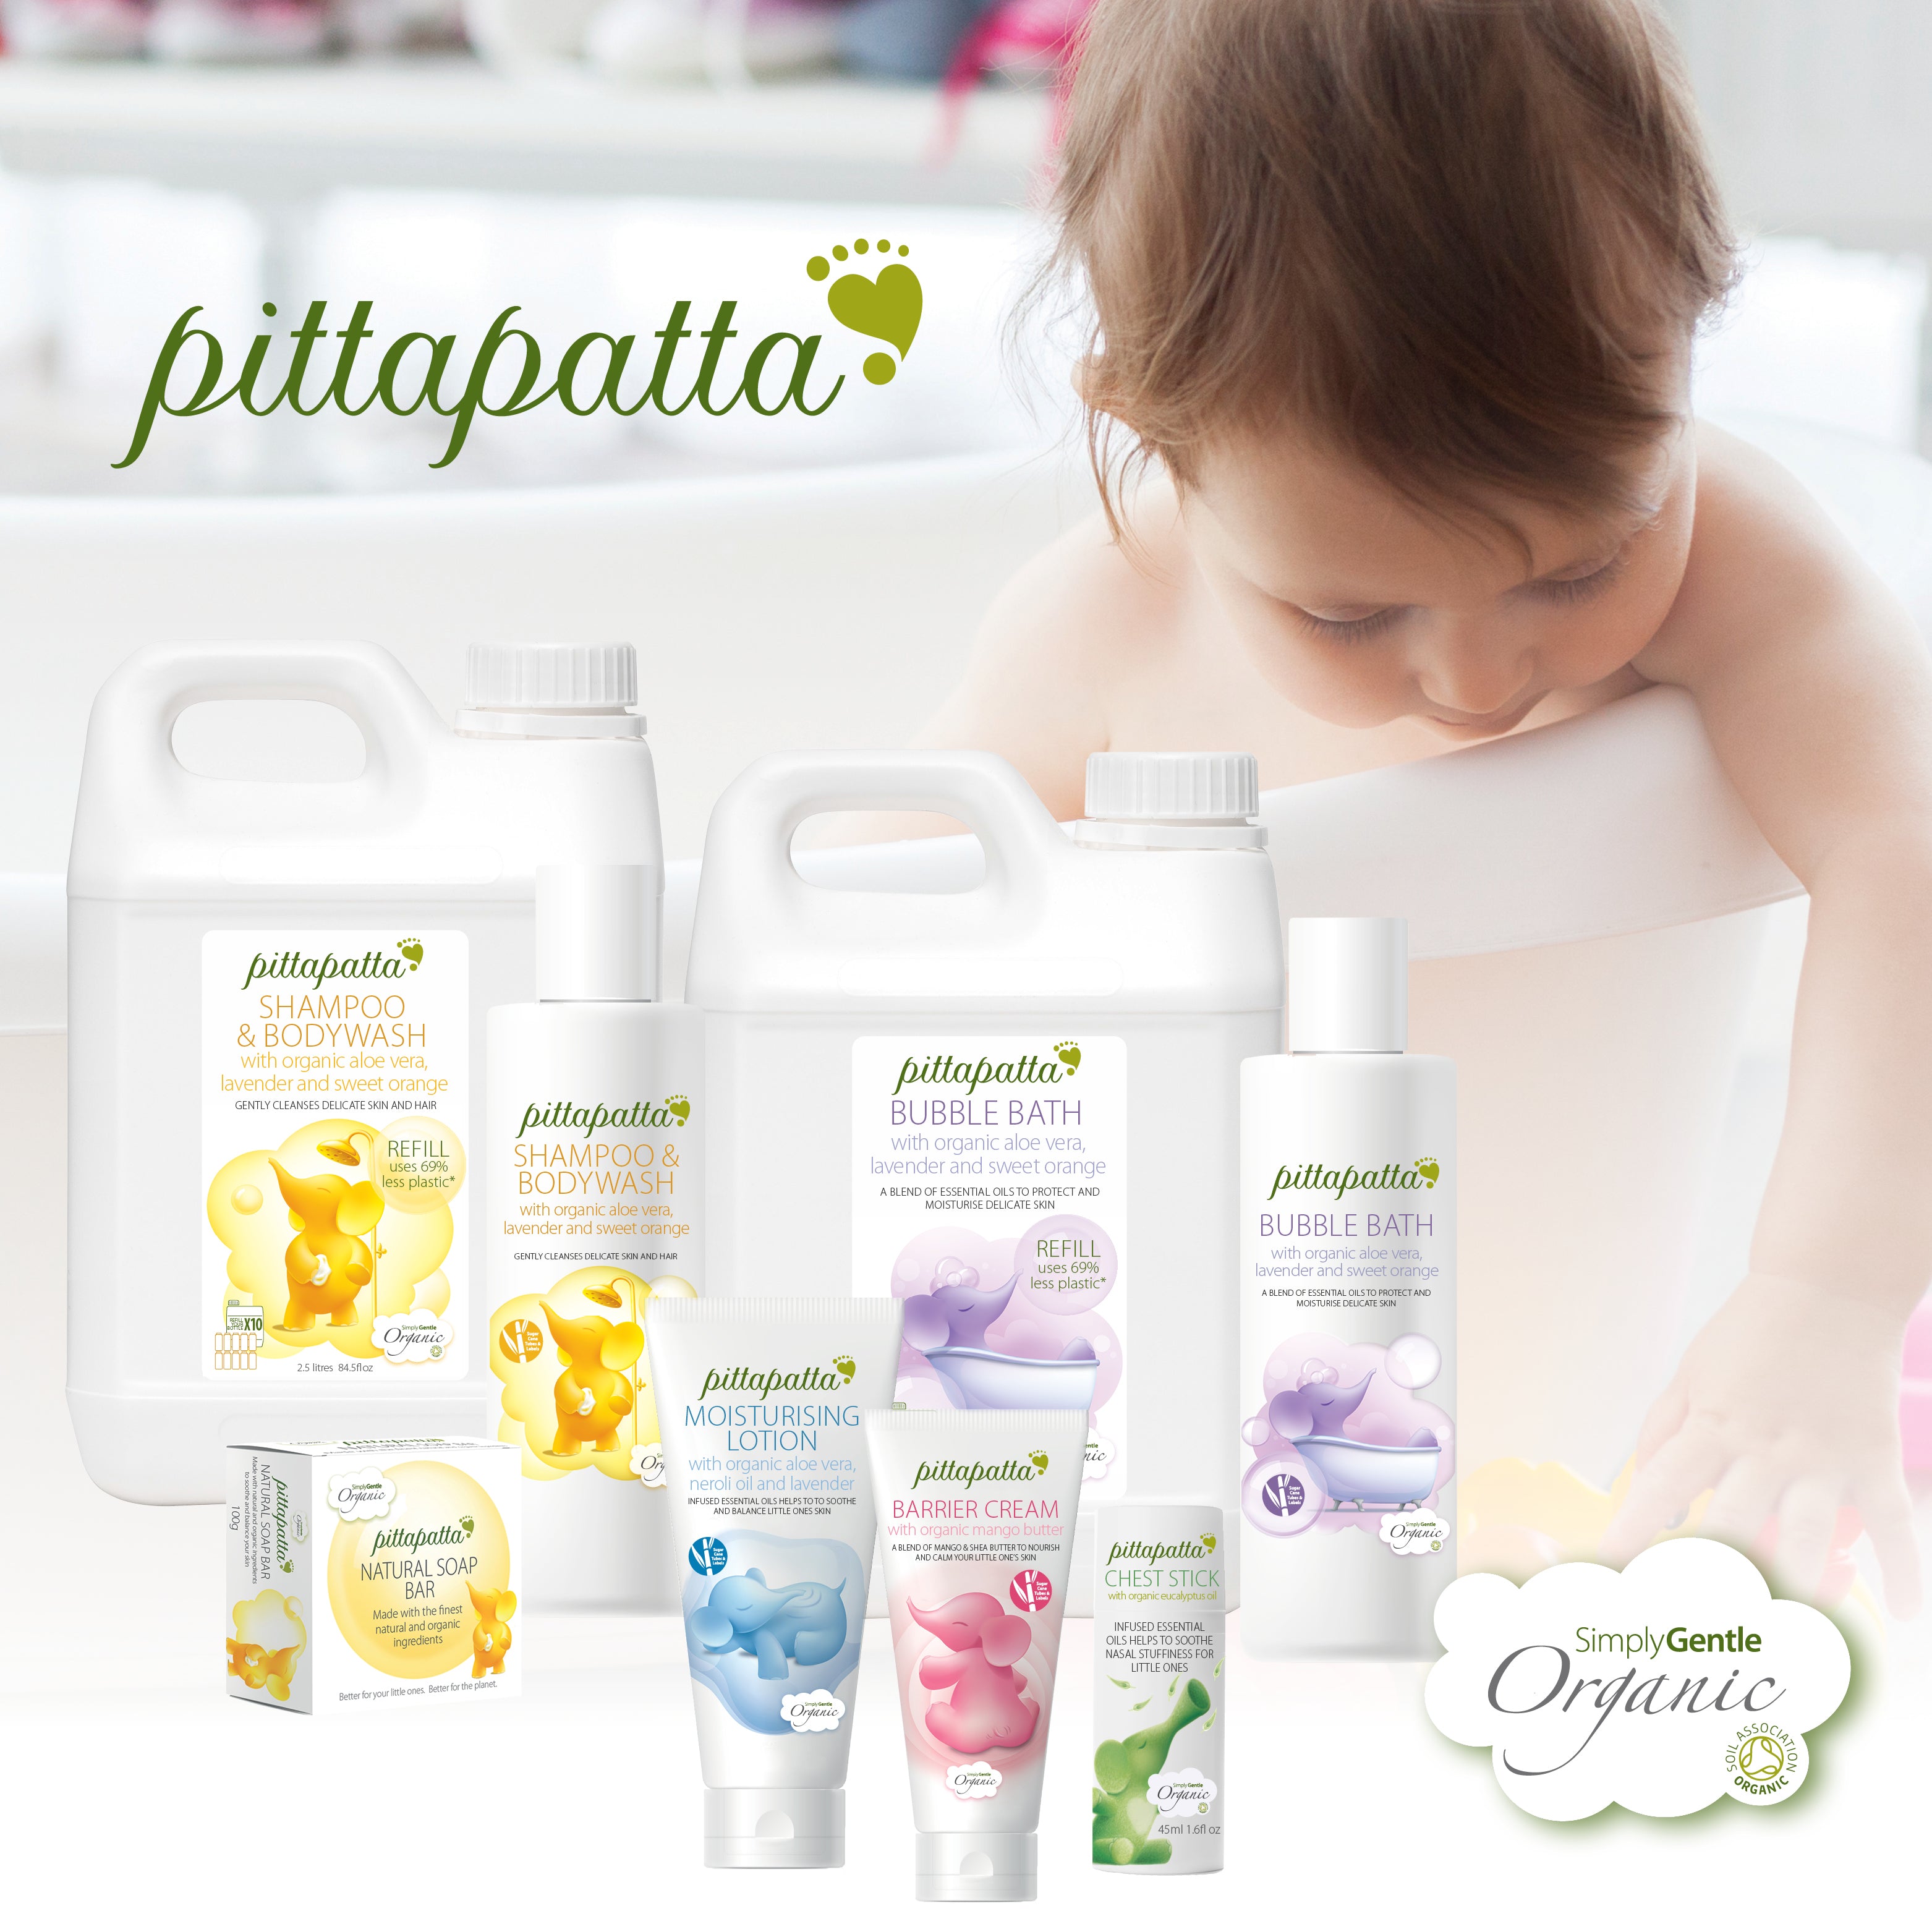 Simply Gentle Organic and Pittapatta bodycare ranges, the whole range is made from natural and organic ingredients and infused with organic essential oils and flower essences designed to be gentle and a joy to use. We know how important healthcare is to you and your family, and all our existing and new products have been developed to combine natural and organic ingredients with practical family care, which is why all our products are only made with the finest and softest organic materials.